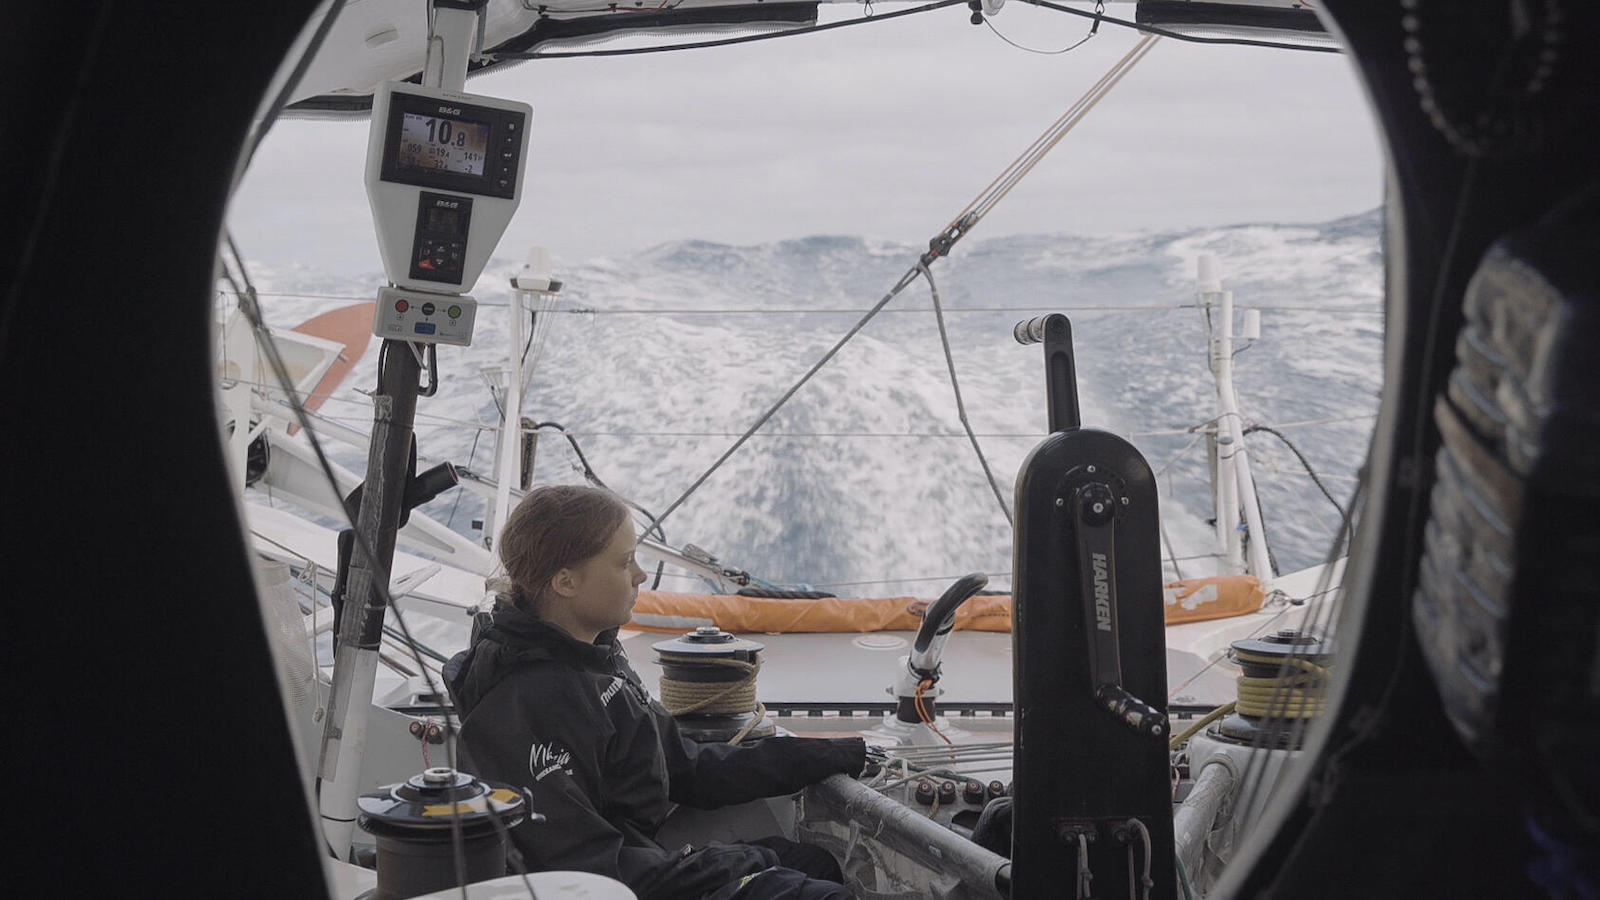 Greta Thunberg aboard the Malizia II, the racing yacht that carried her across the Atlantic for the United Nations Climate Action Summit.